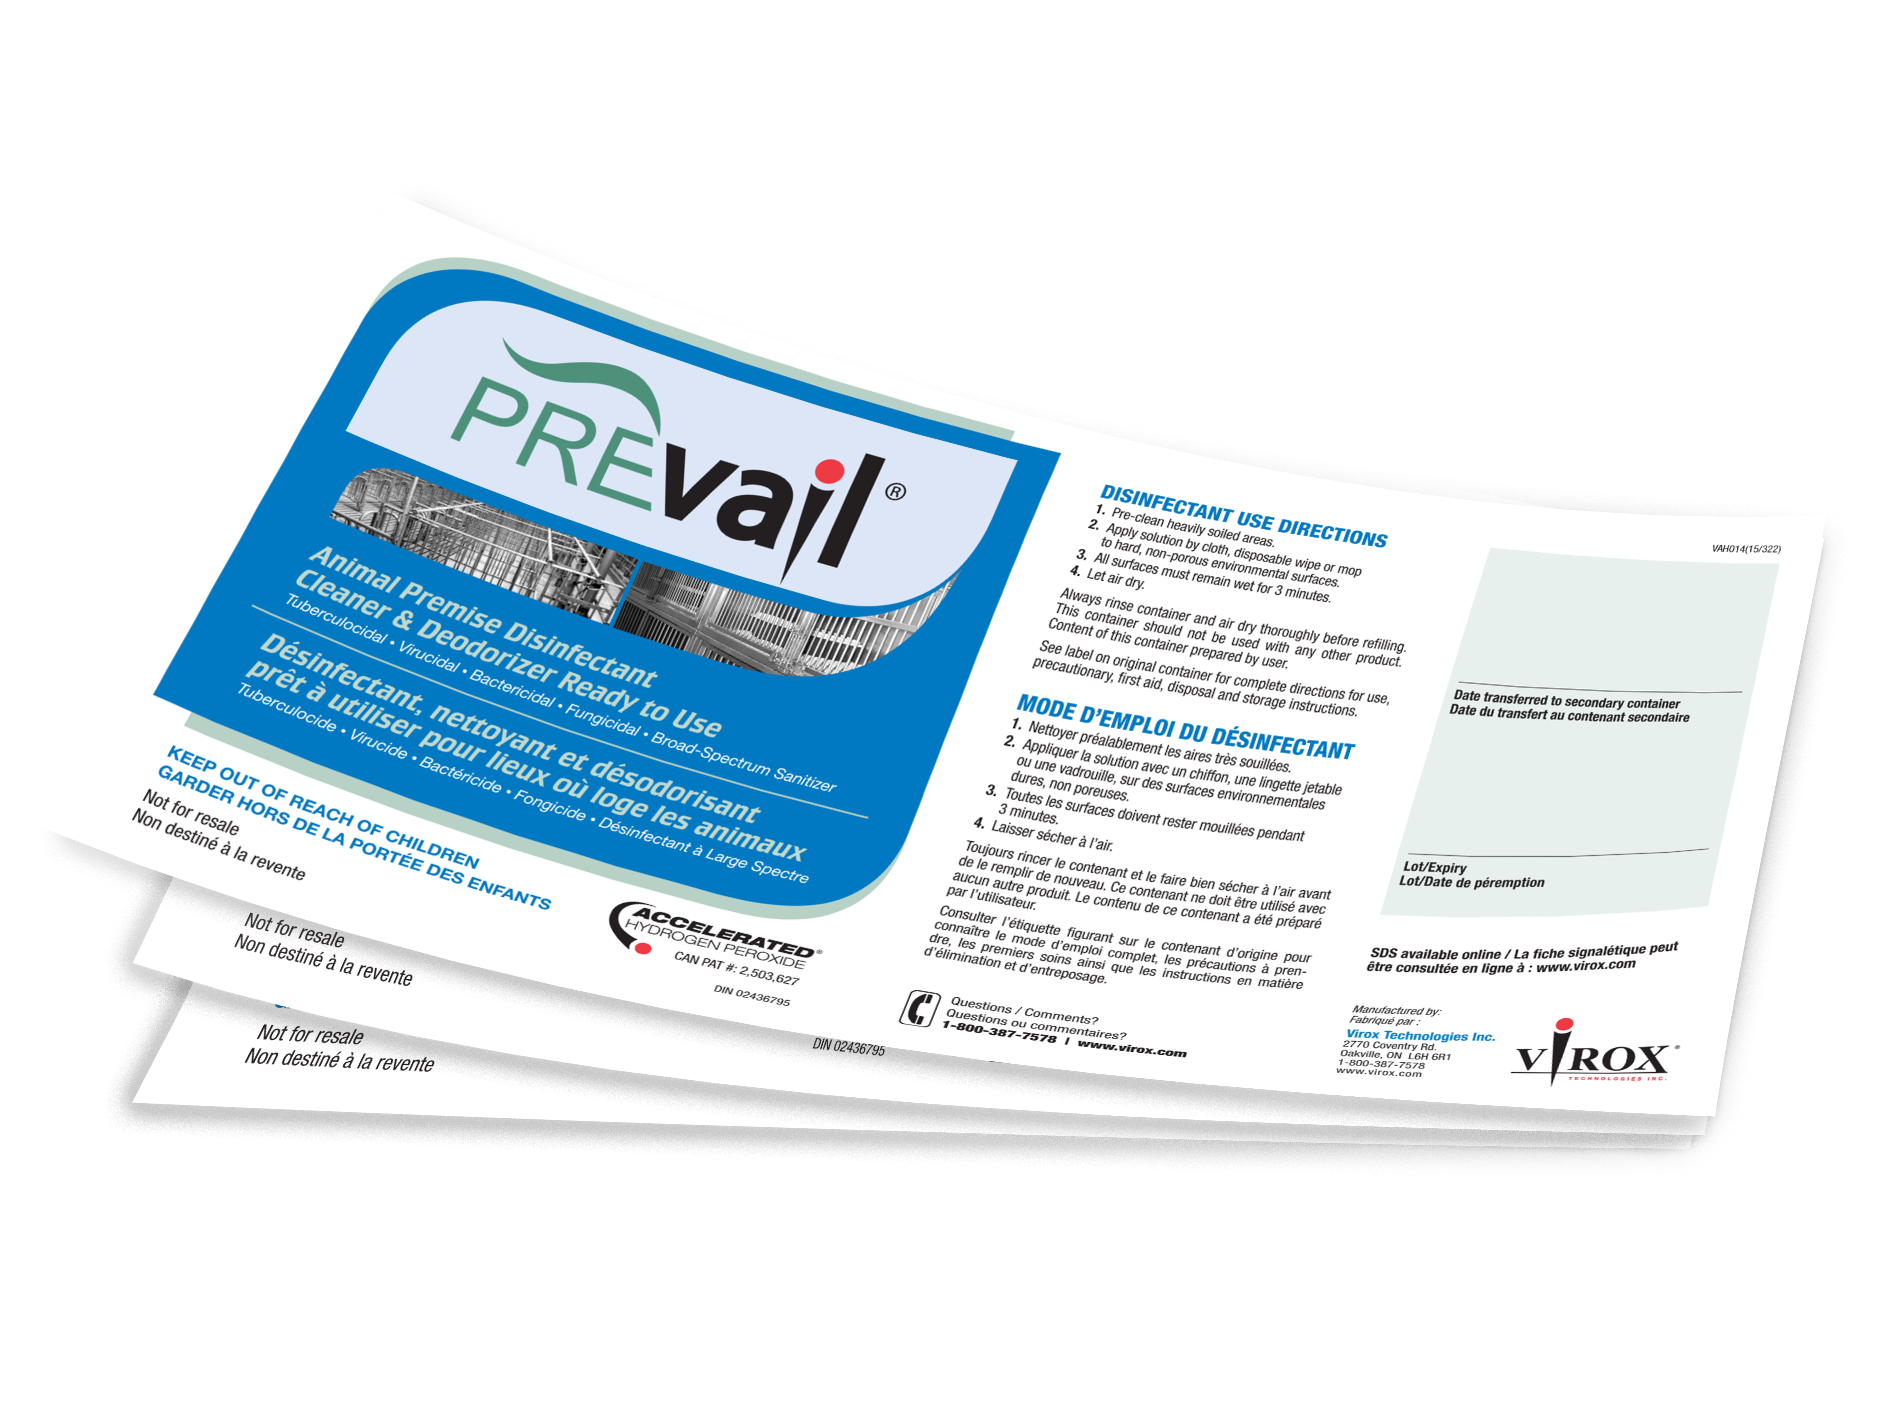 Prevail-workplace-label-product-image-1.png